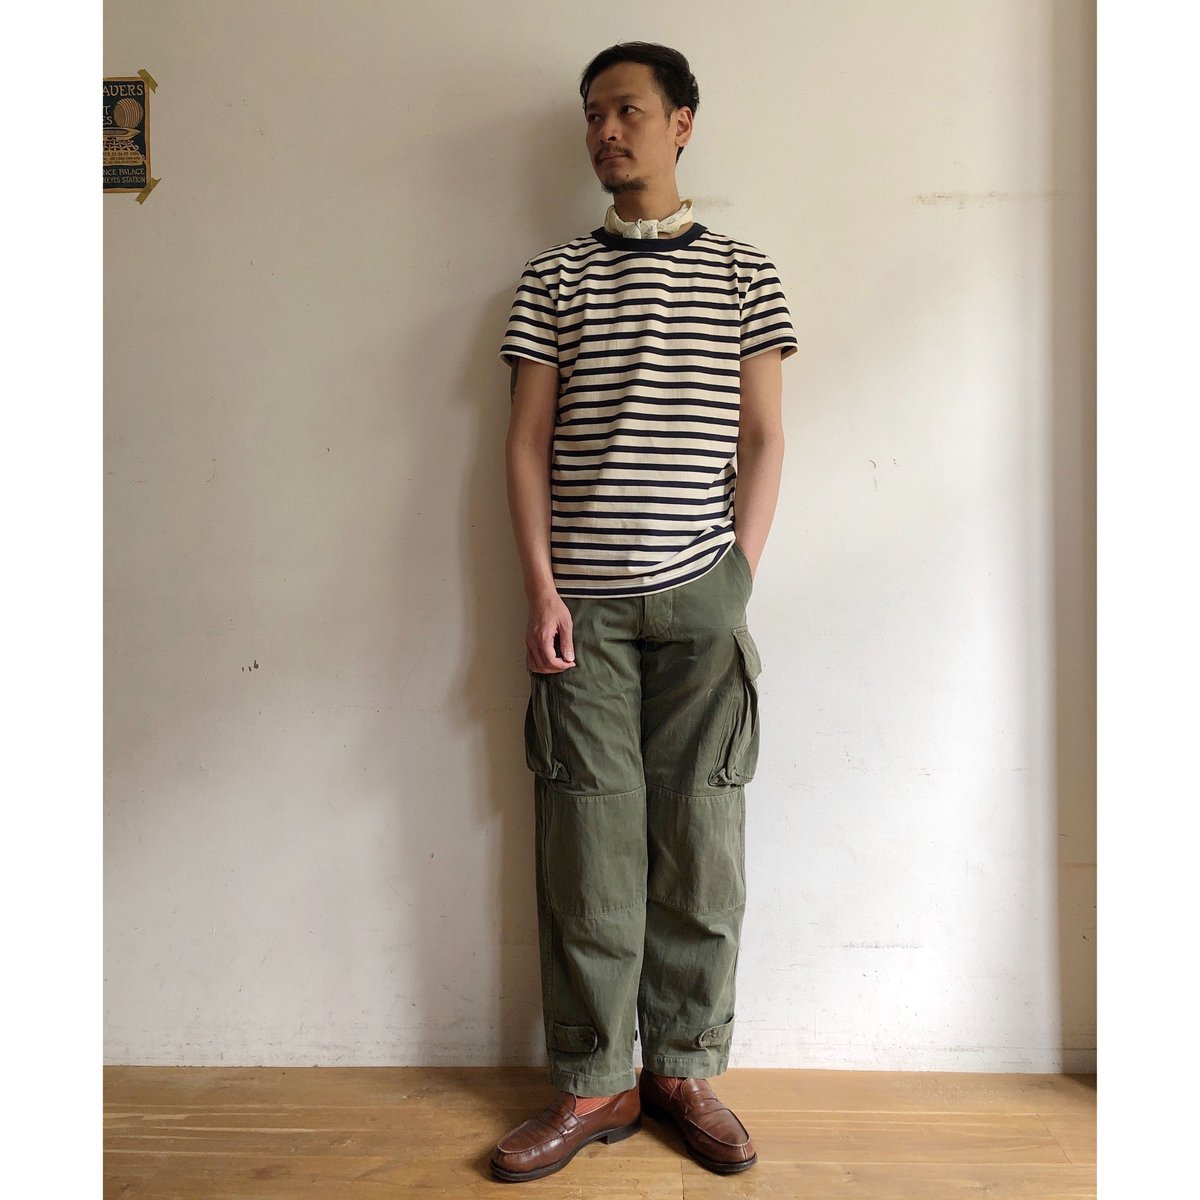 60's French Army M47 Field Trousers 